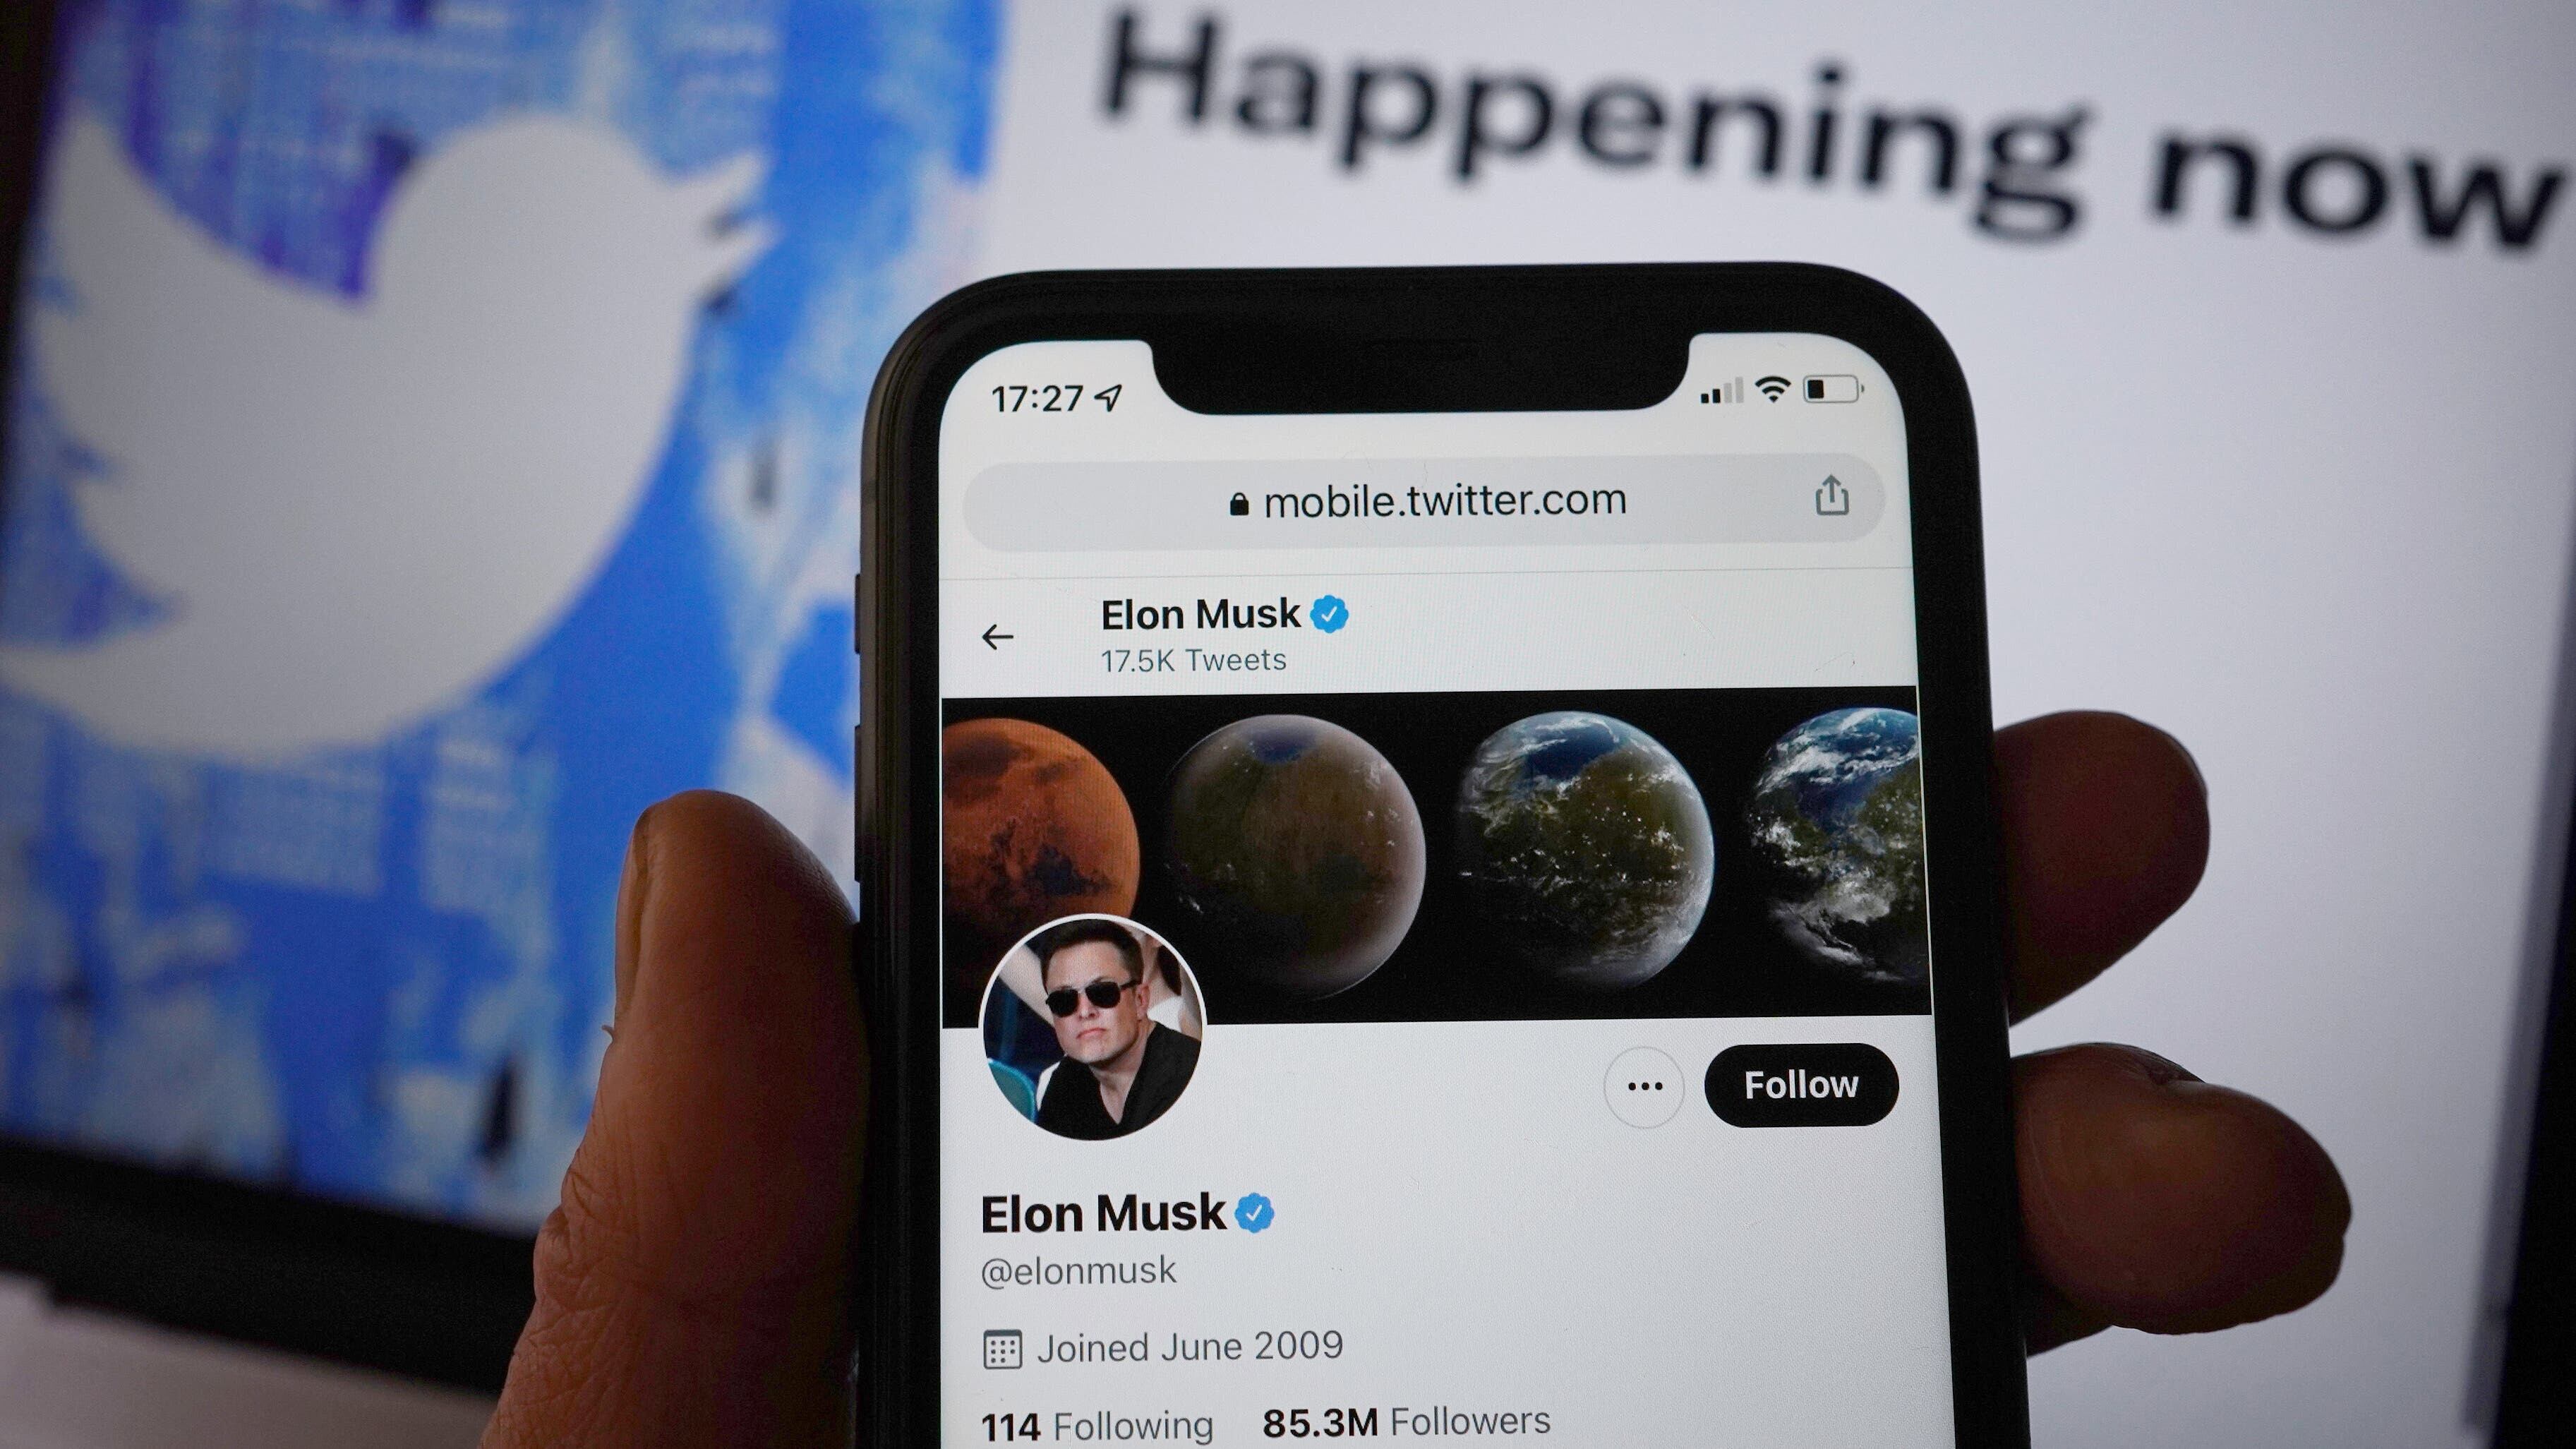 Chief executive Elon Musk said ‘Official’ verified labels were axed because they were ‘an aesthetic nightmare’.